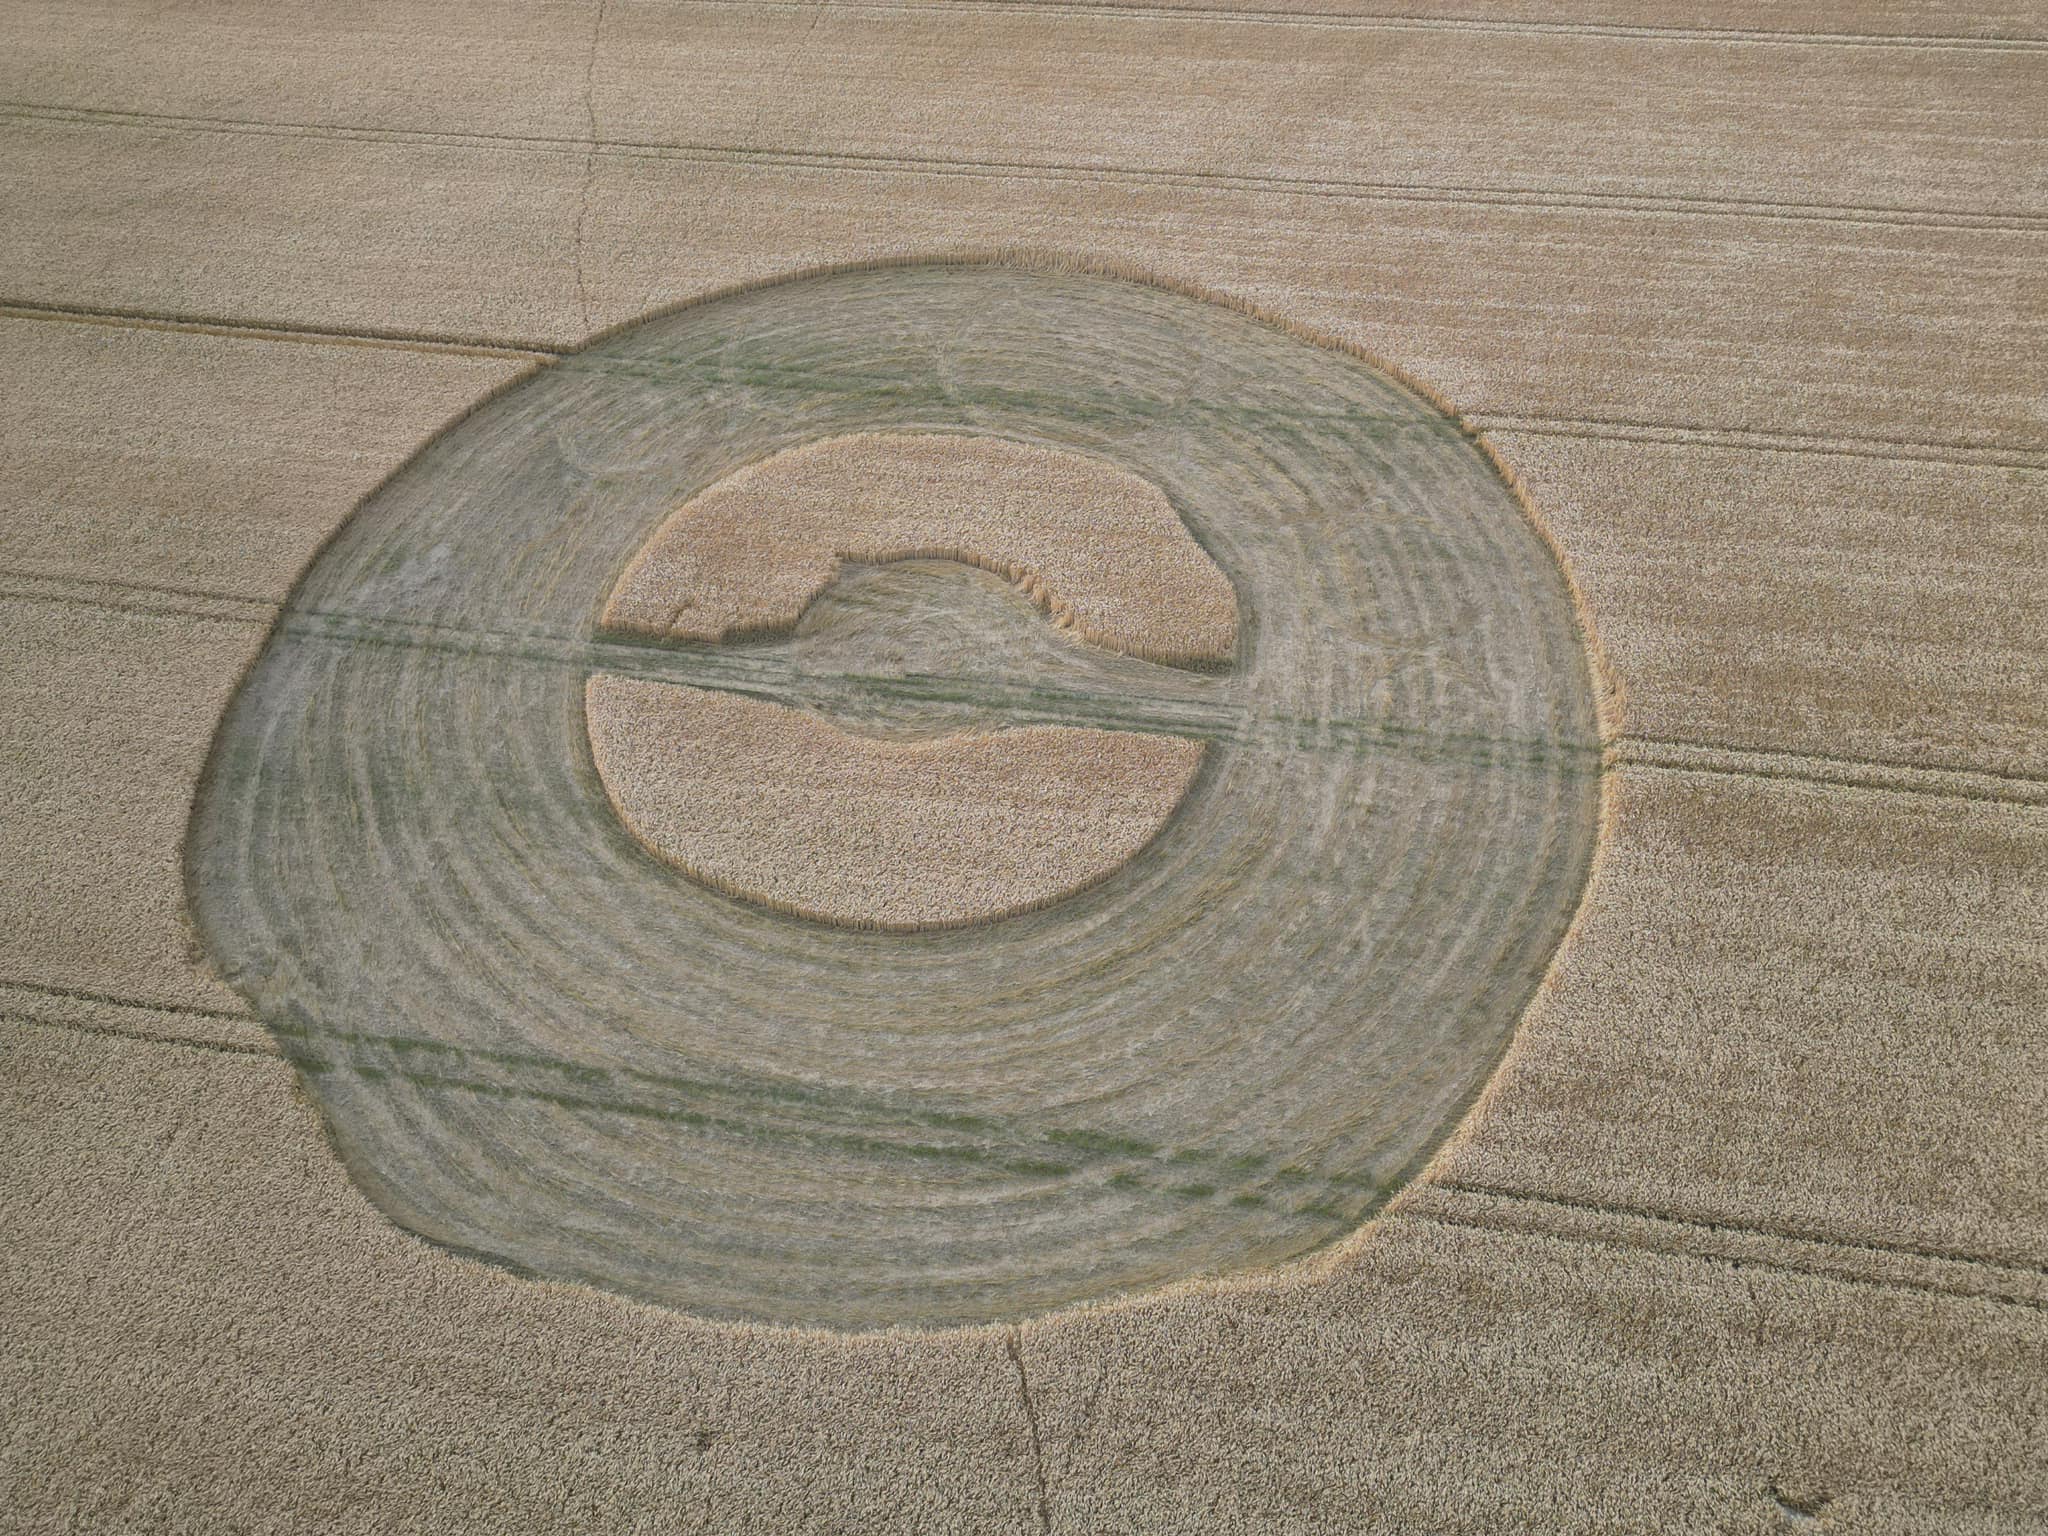 A half cropped color photograph almost exactly like the previous photograph taken from a slightly different aerial view of a crop circle in the shape of a lumpy wide ring of flattened crop where several rings are visible within the flattened part with a center lumpy circle of upright crop. The circle of upright grass is divided by an off-center horizontal line of flattened crop with a small circle of flattened crop at the center. 3 evenly spaced sets of 2 lines are visible through the crop circle and in the field surrounding the crop circle.